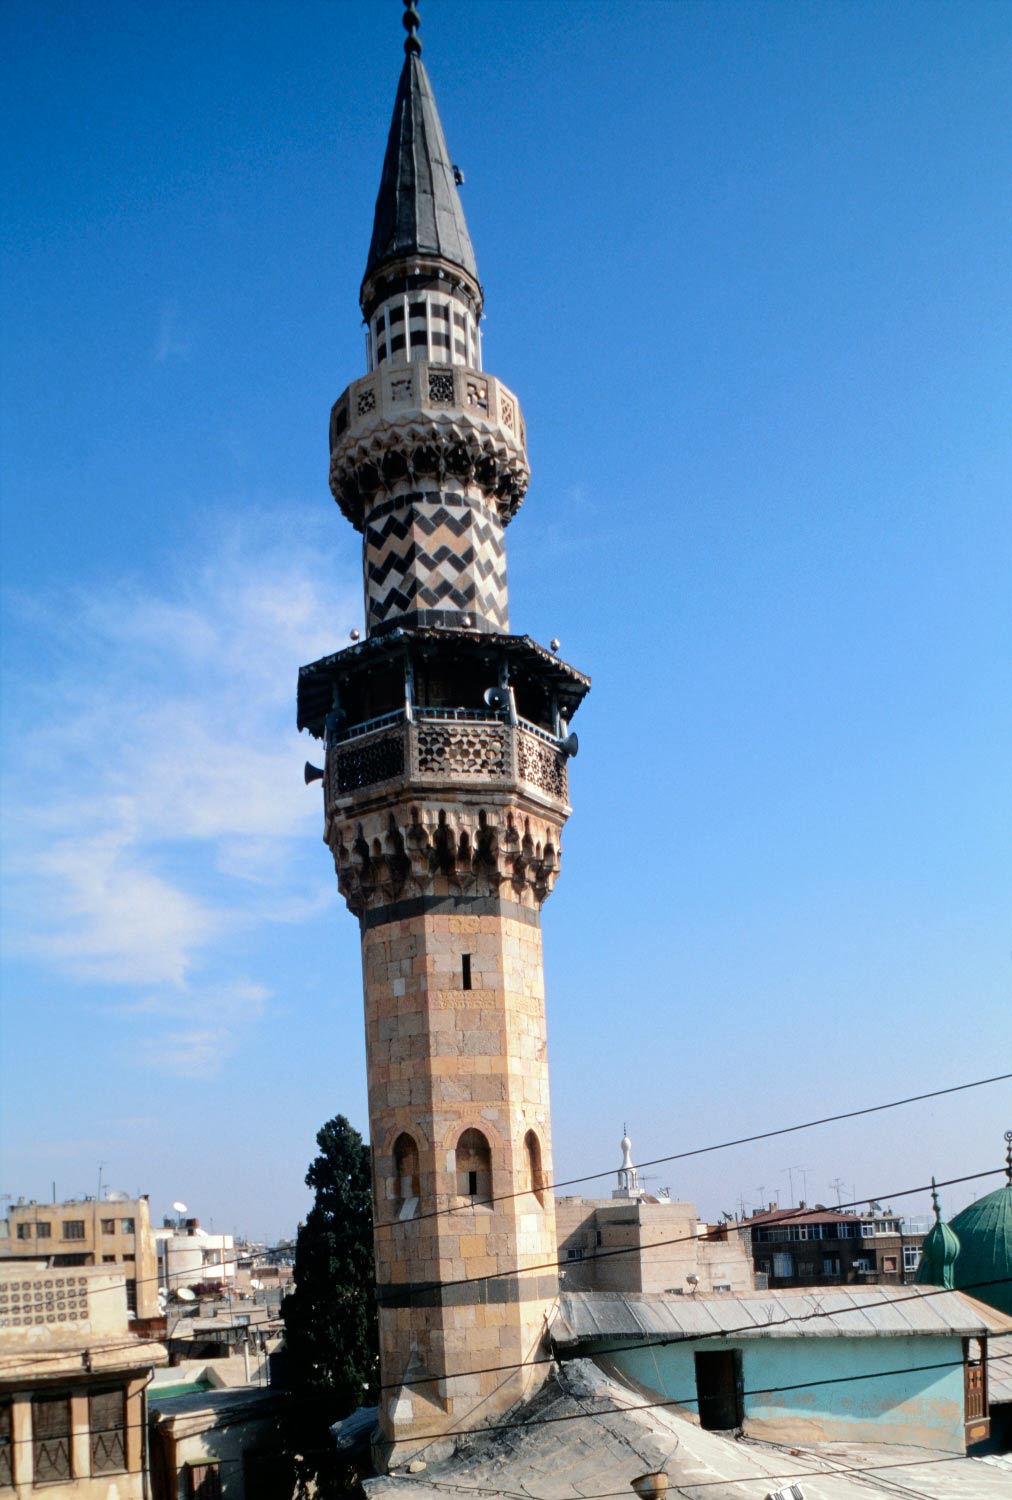 Overview of the minaret